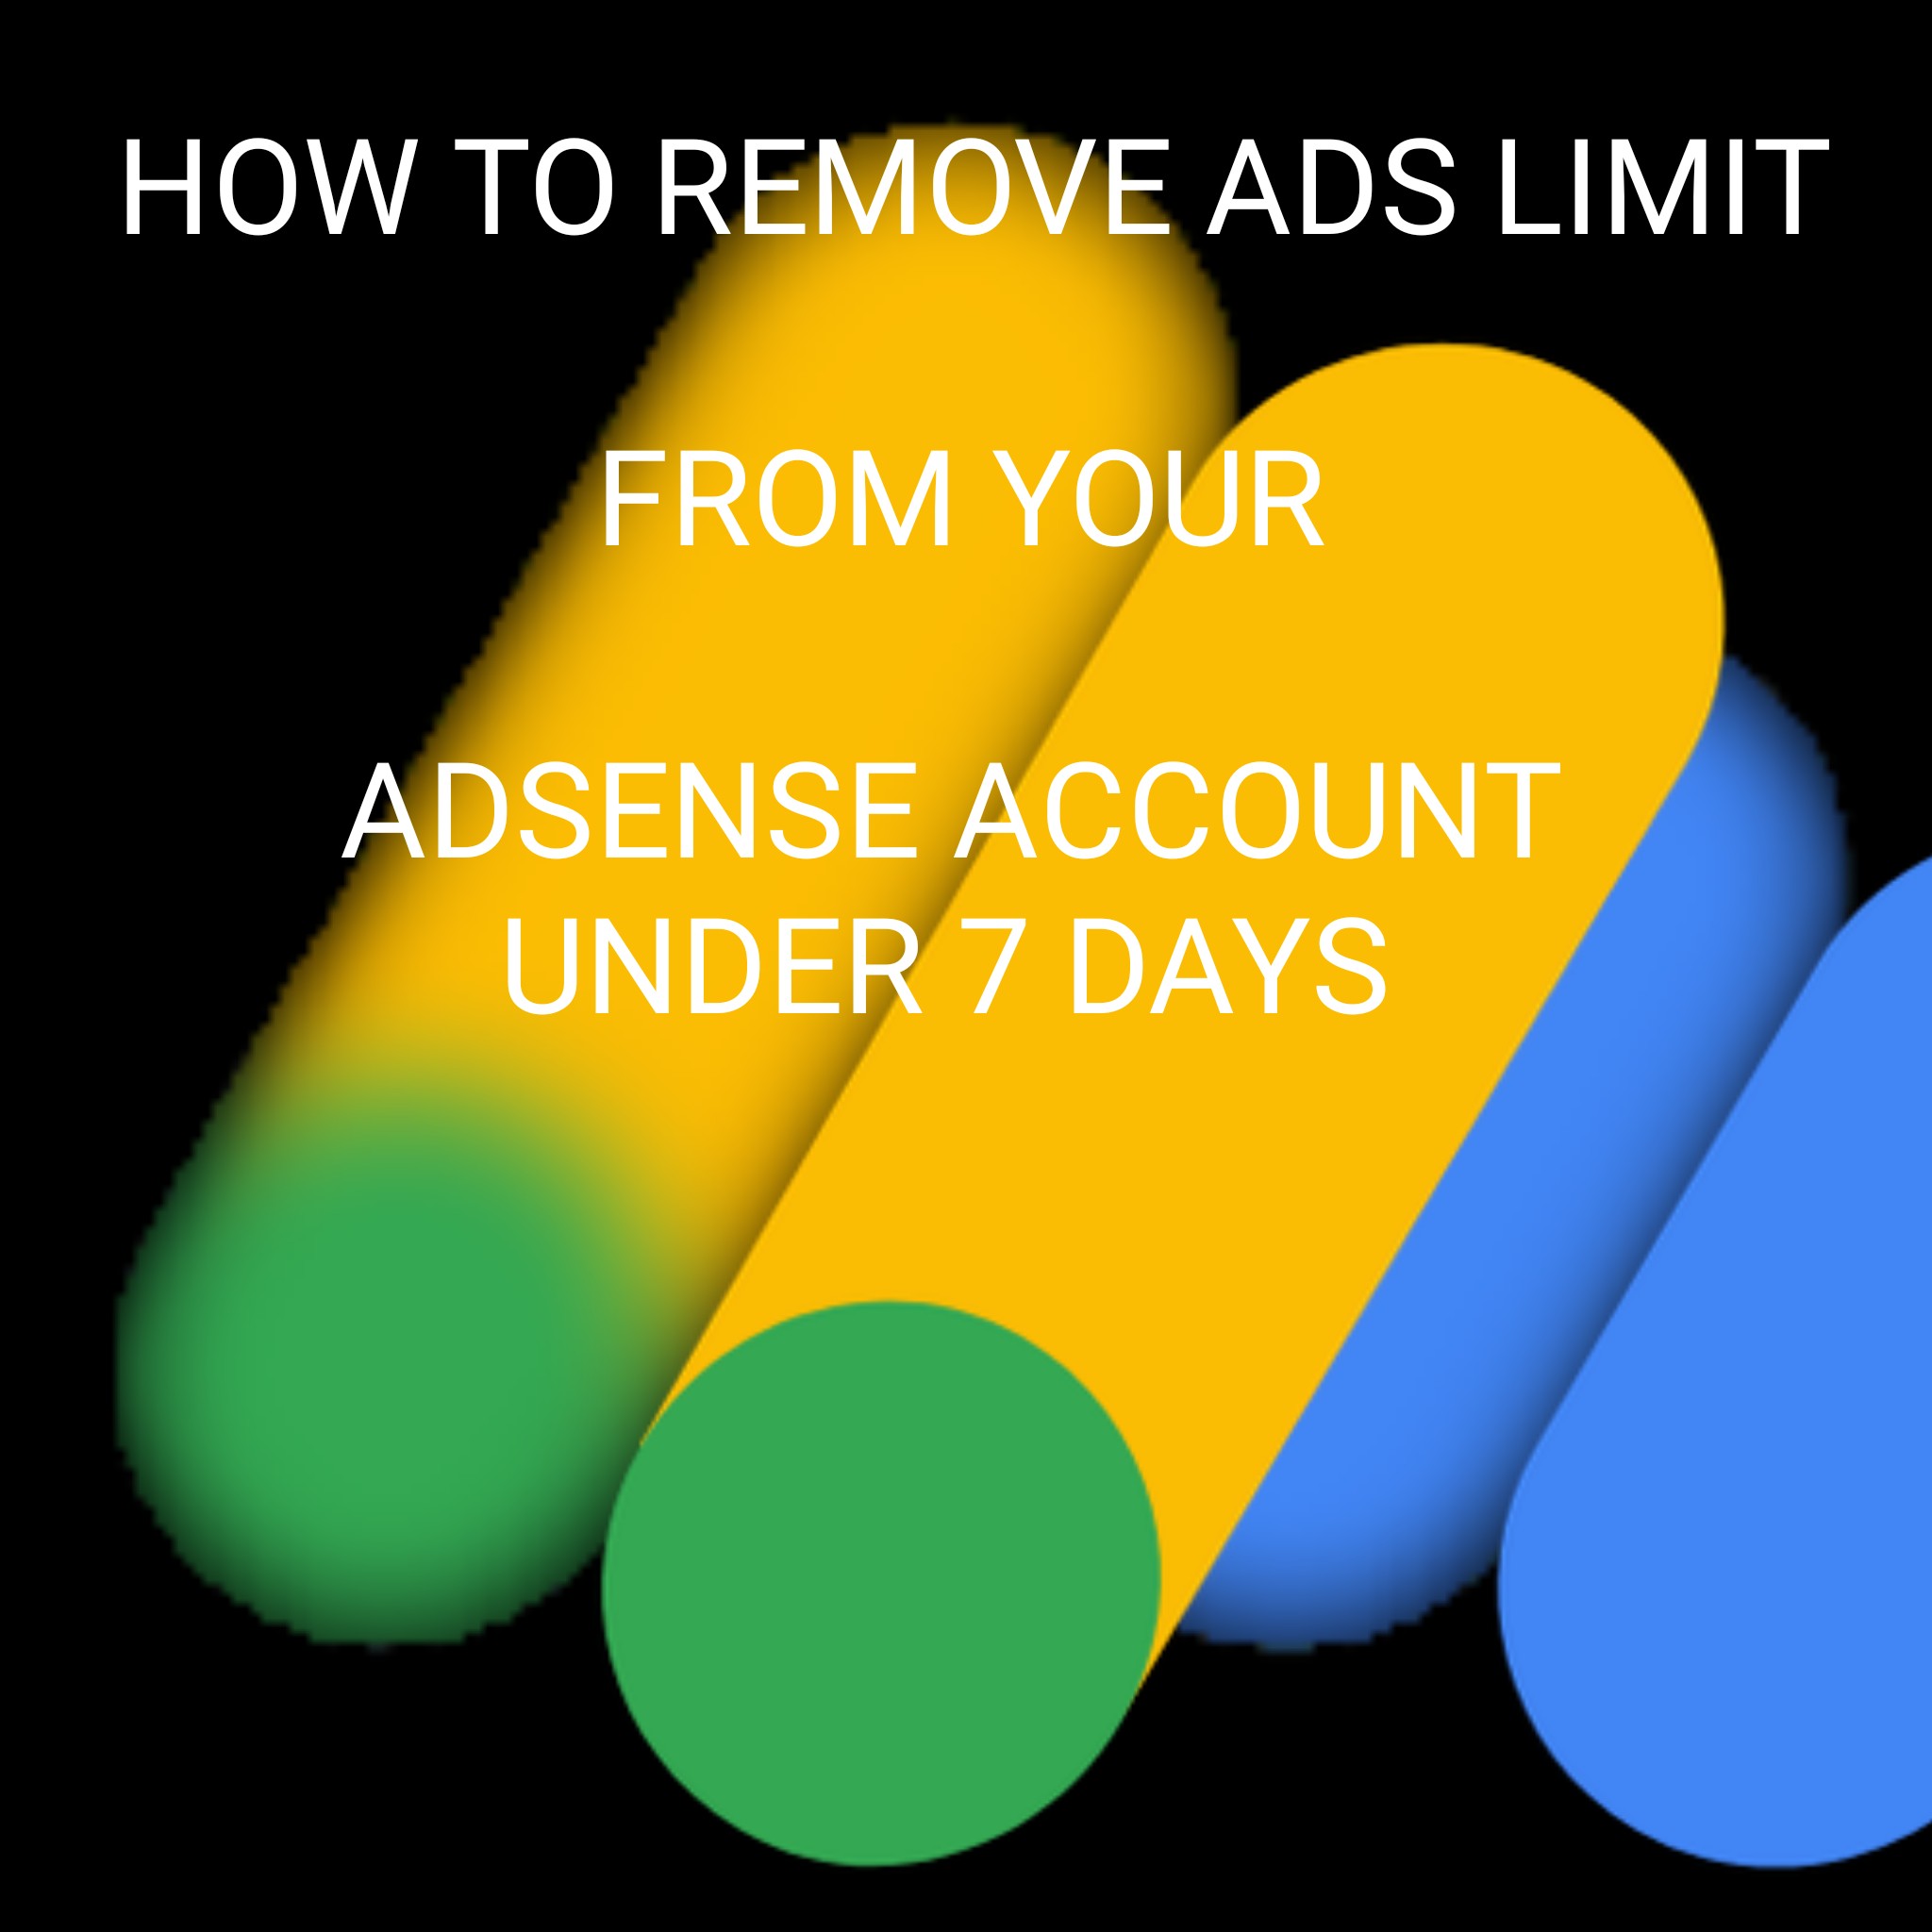 Google Adsense Ads Limit Solution: If you do this Under 7 Days. ads limit will be removed